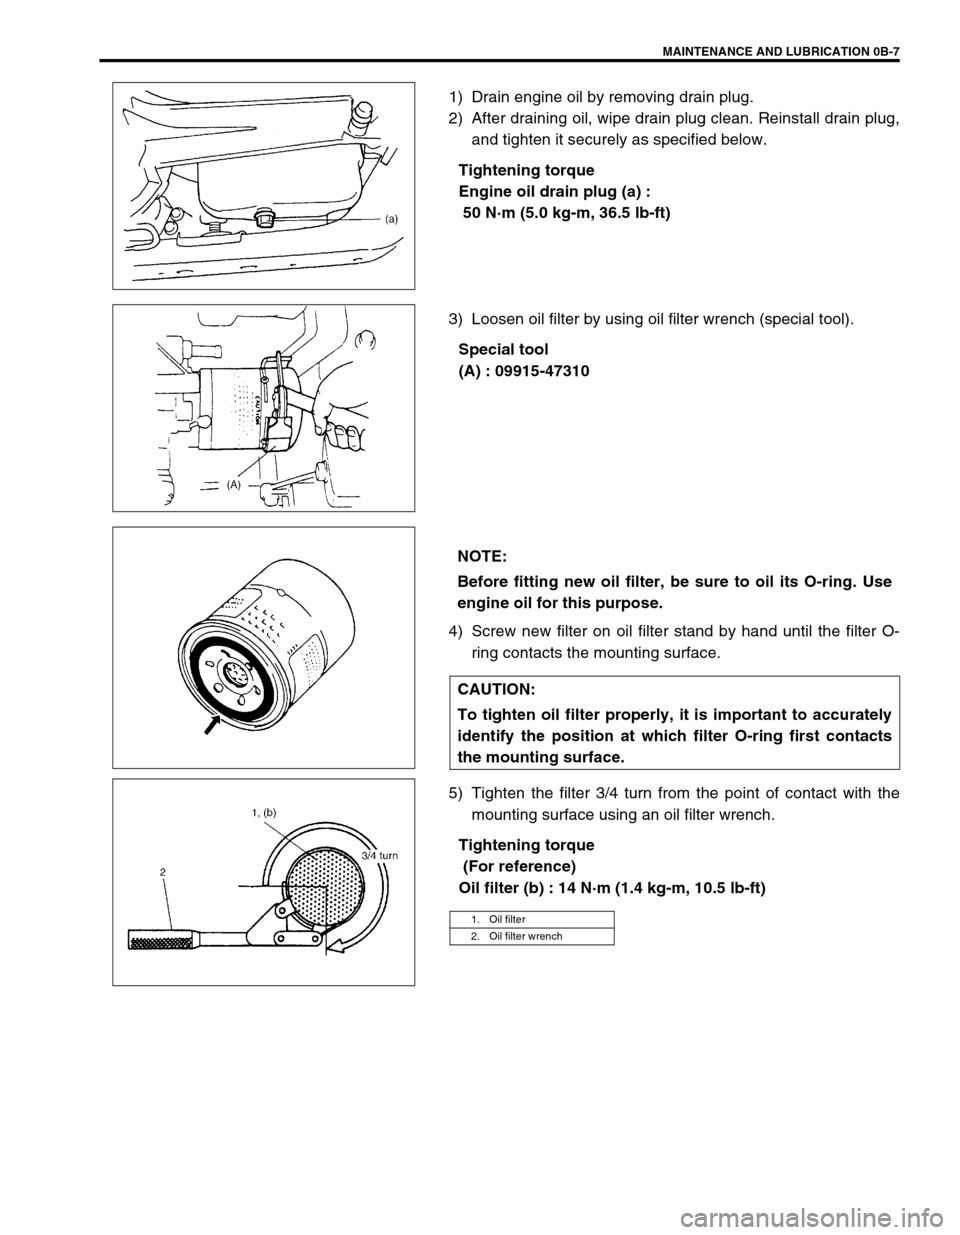 SUZUKI GRAND VITARA 1999 2.G Owners Manual MAINTENANCE AND LUBRICATION 0B-7
1) Drain engine oil by removing drain plug.
2) After draining oil, wipe drain plug clean. Reinstall drain plug,
and tighten it securely as specified below.
Tightening 